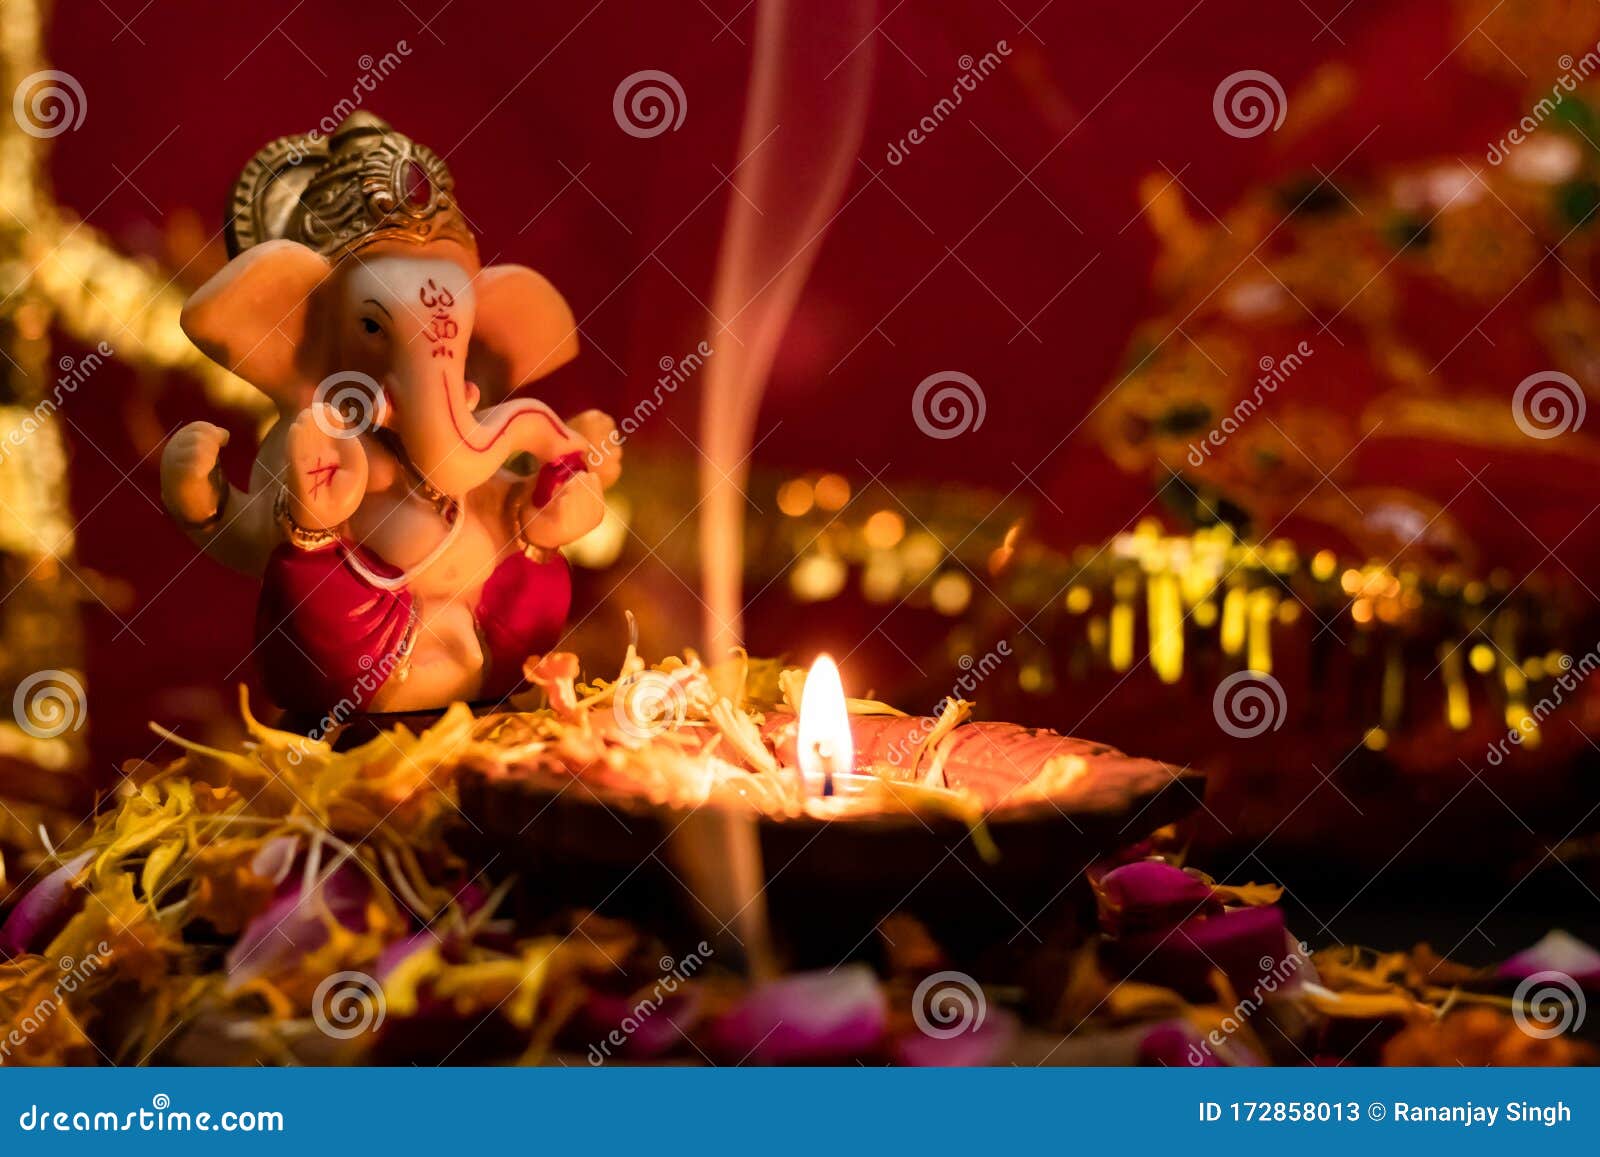 3 579 Beautiful Lord Ganesha Photos Free Royalty Free Stock Photos From Dreamstime This application is an unofficial fan based application.no copyright infringement is intended, and any. https www dreamstime com beautiful small statue lord ganesha clay lamp rose petals against red golden background hinduism religion concept image172858013